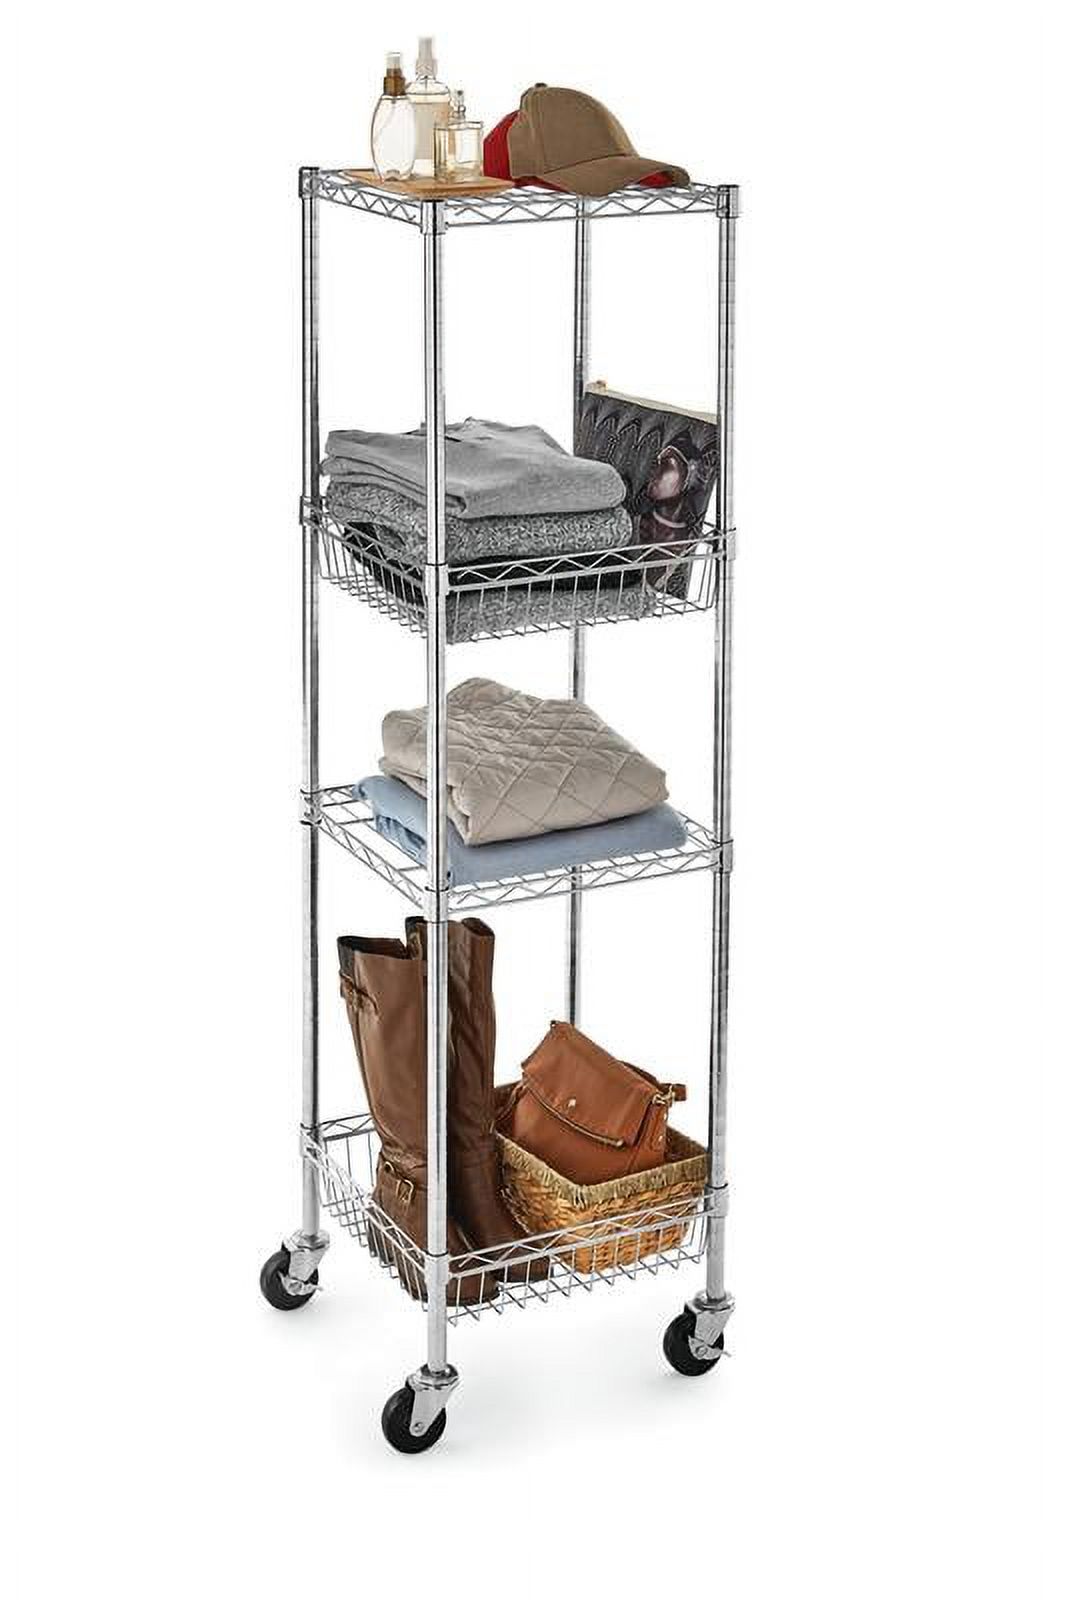 Hyper Tough 4 Shelf Steel Wire Shelving Tower with Caster 16"Dx16"Wx57.4"H, Chrome - image 1 of 6